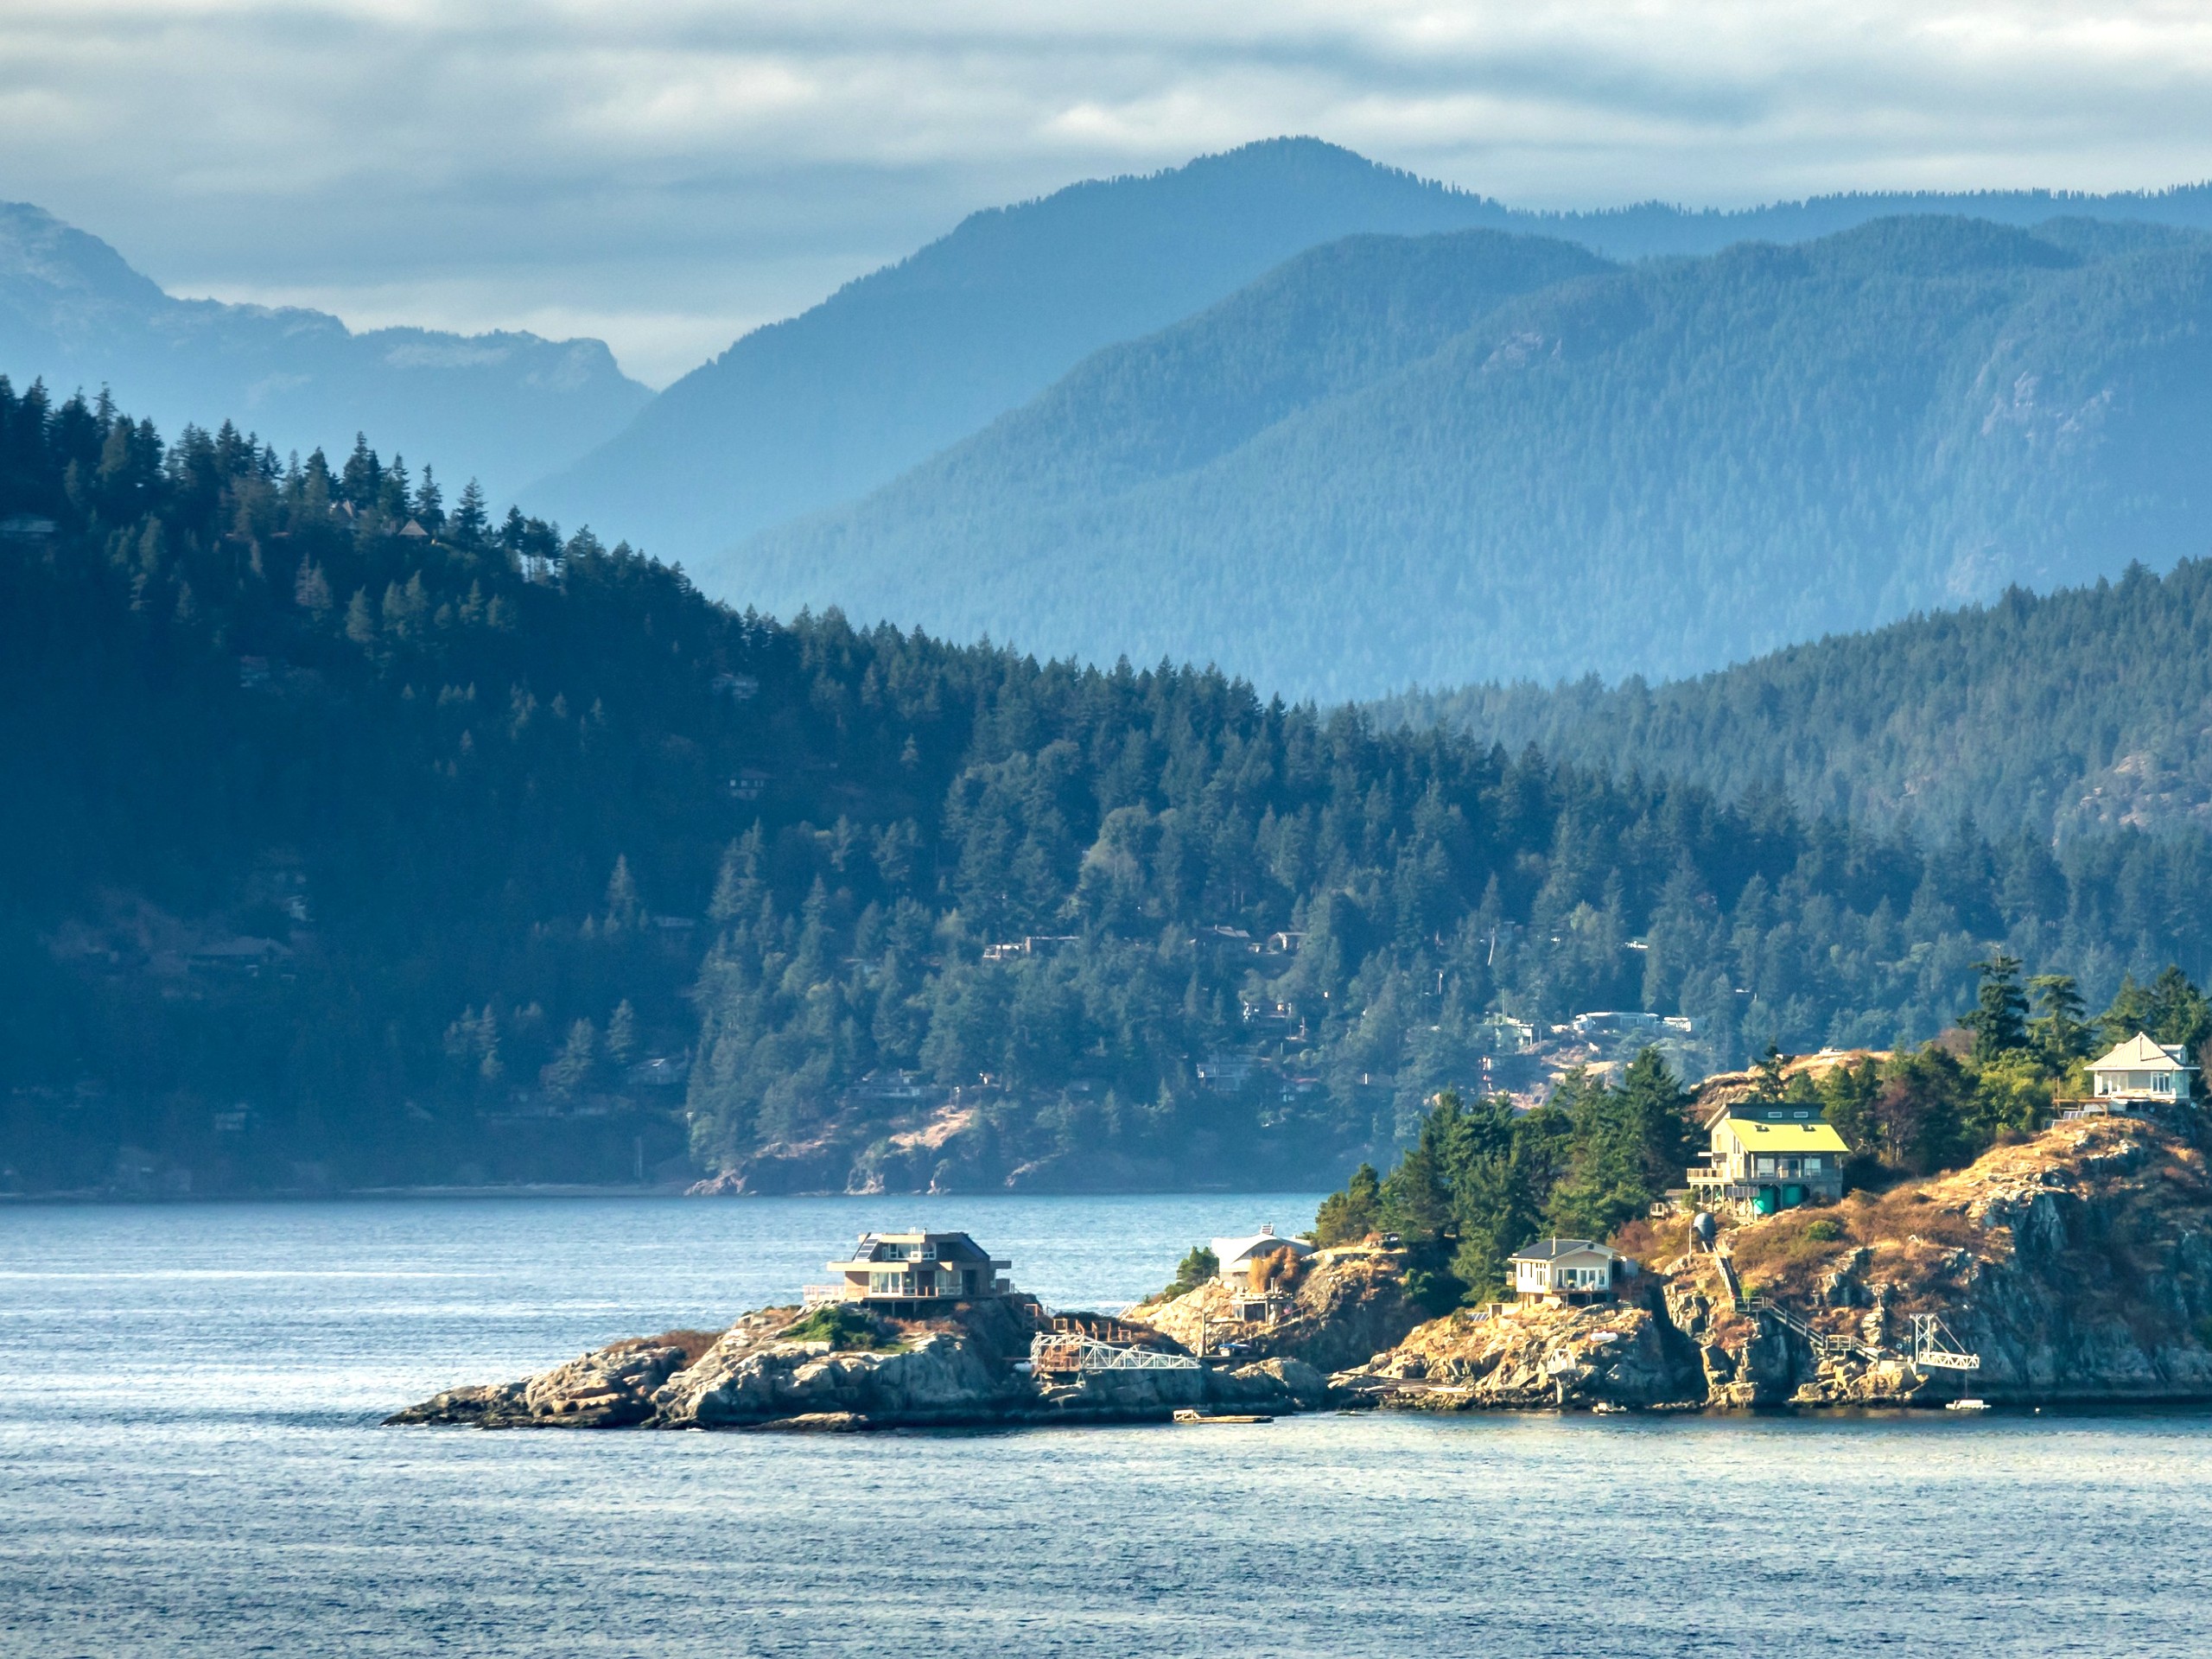 Rugged shores around Vancouver